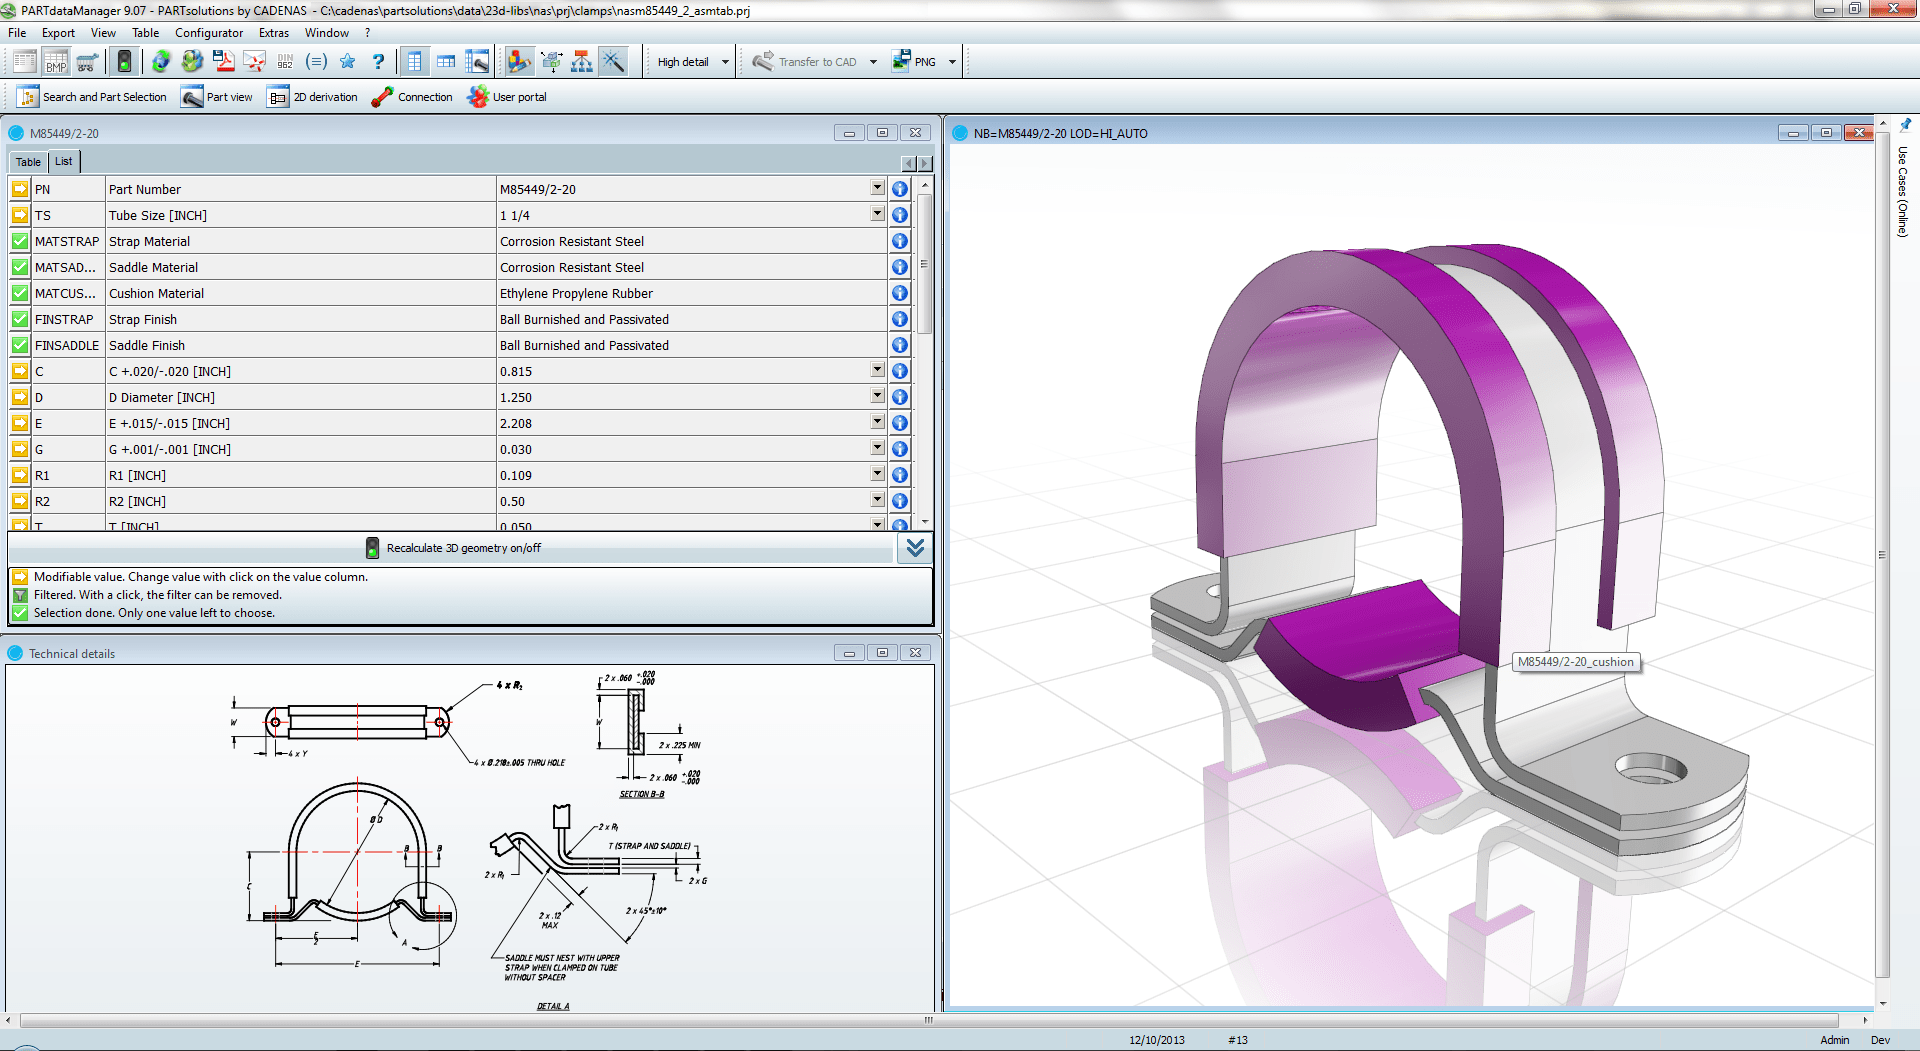 AIA NAS Digital 3D Standards Featured in Aerospace Mfg and Design CADENAS PARTsolutions